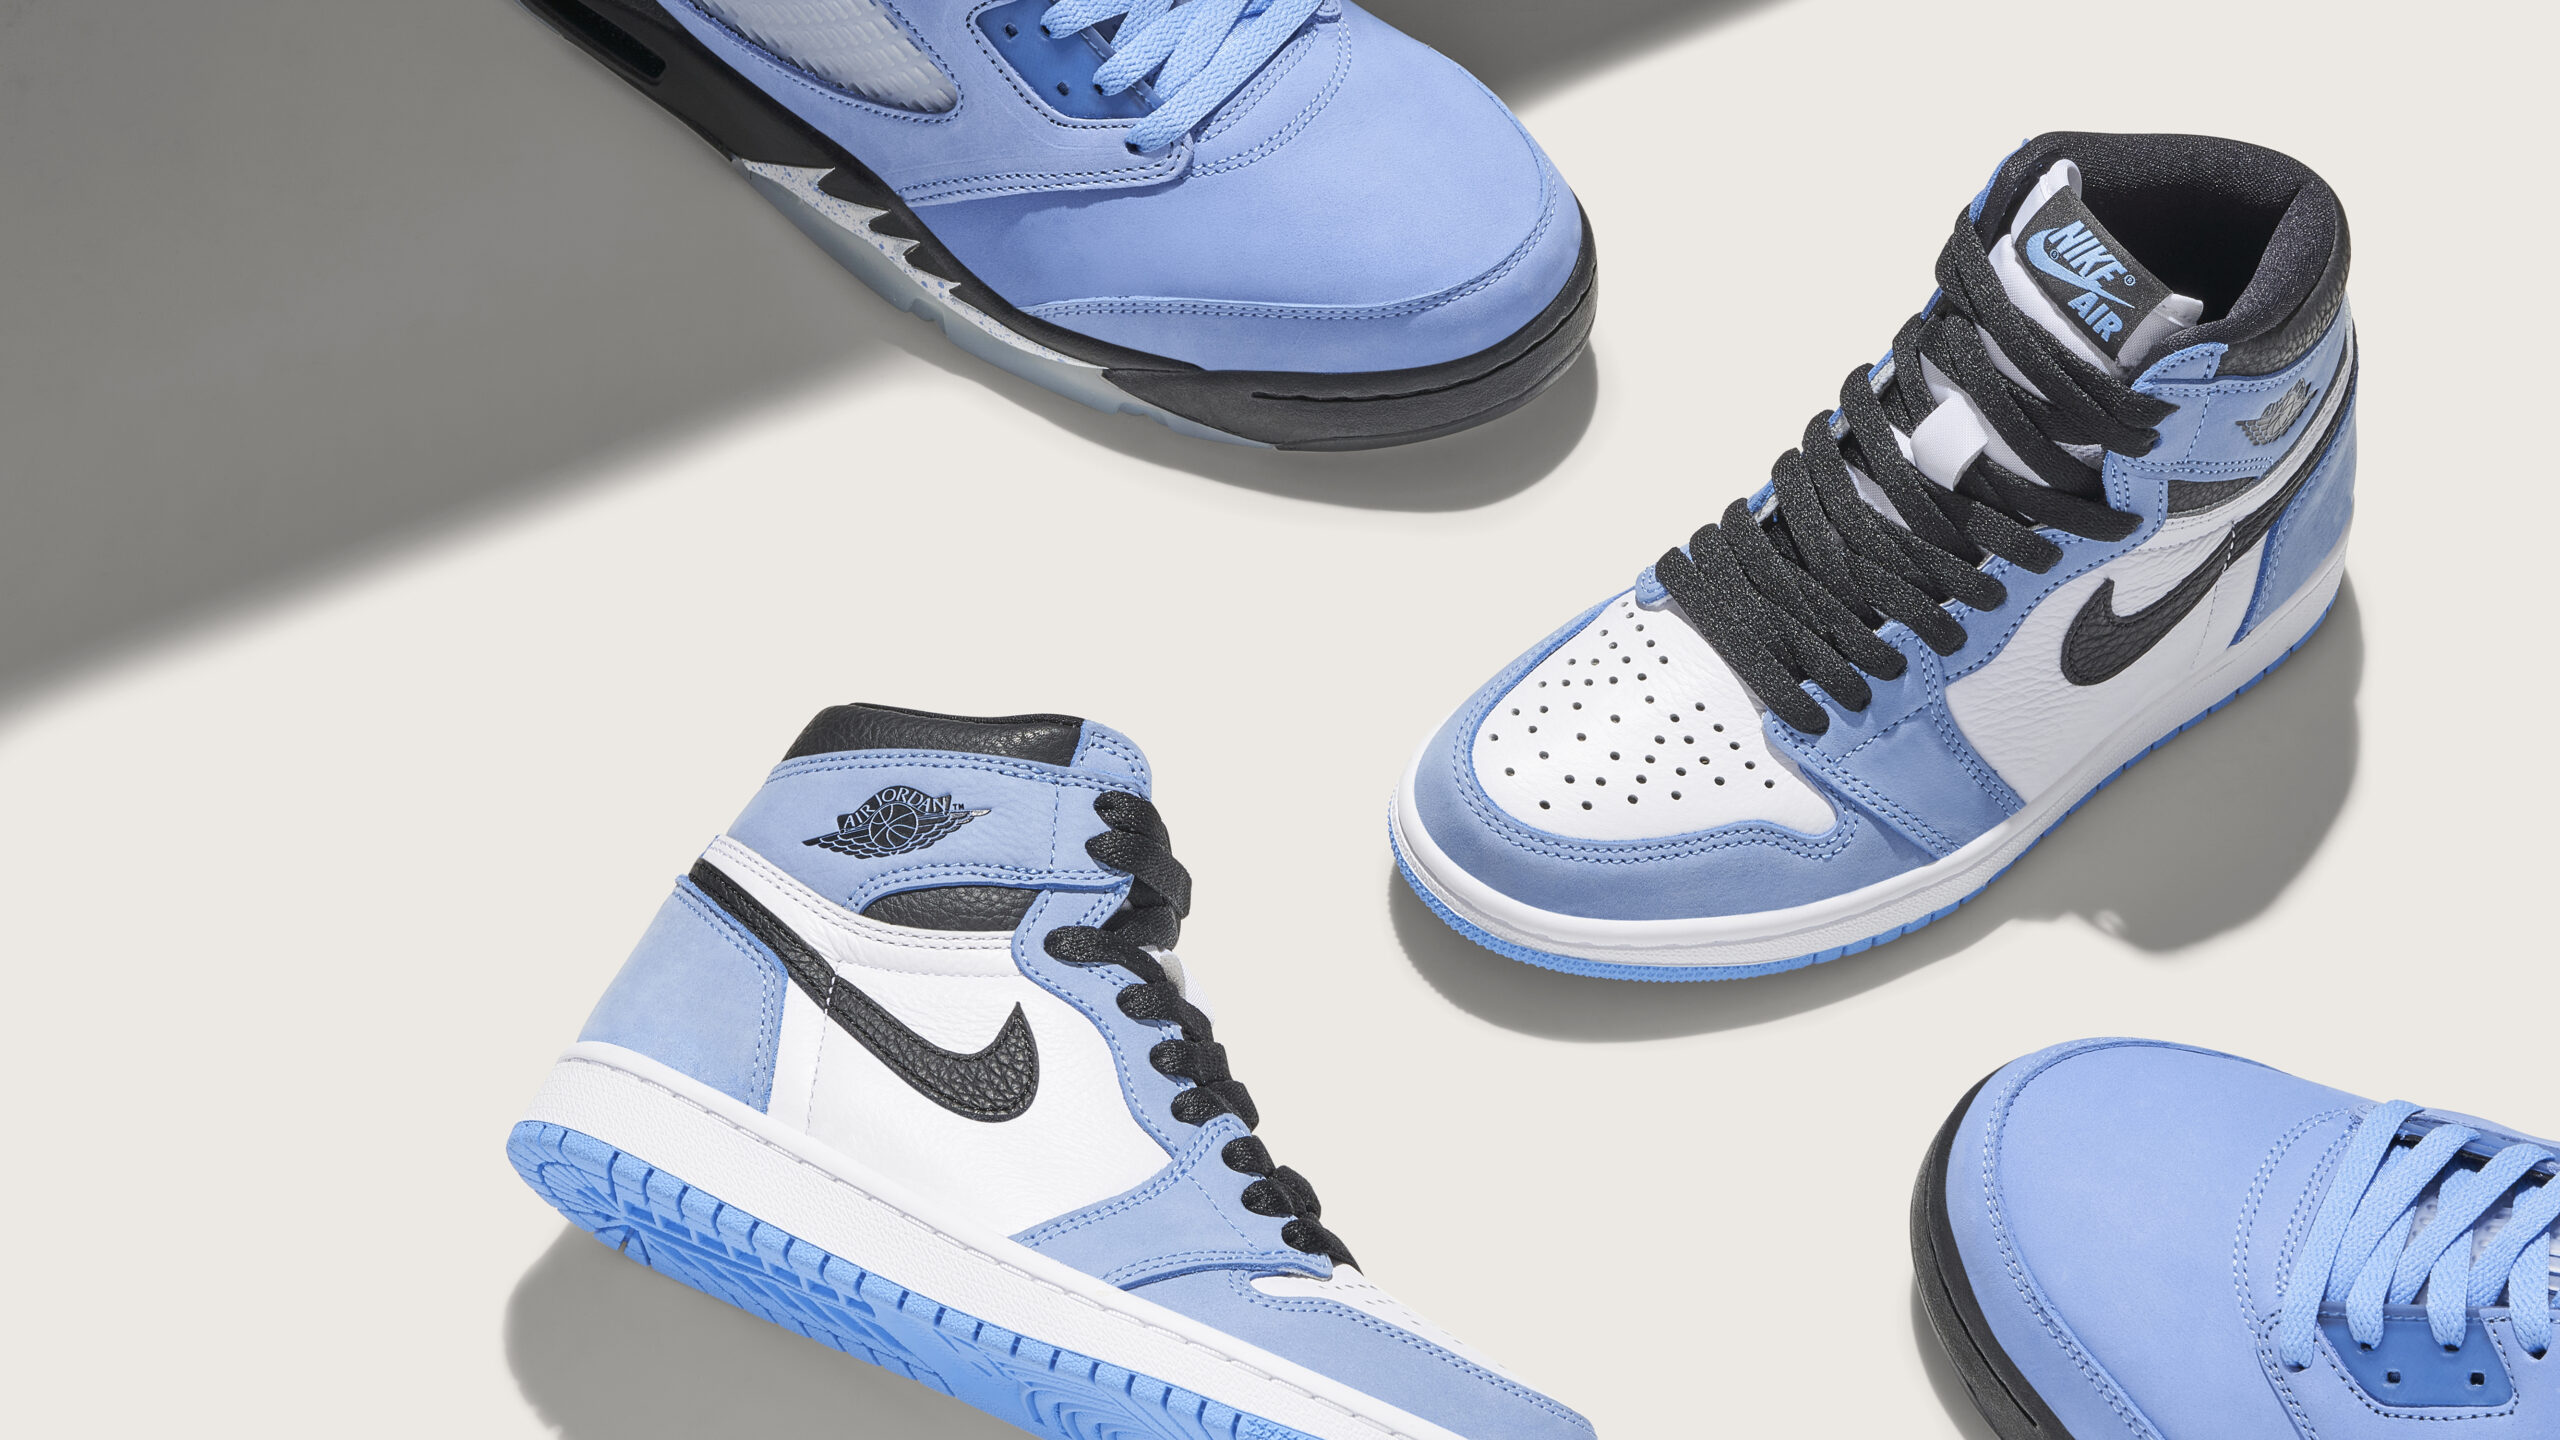 Iconic UNC Sneakers From Air Jordan